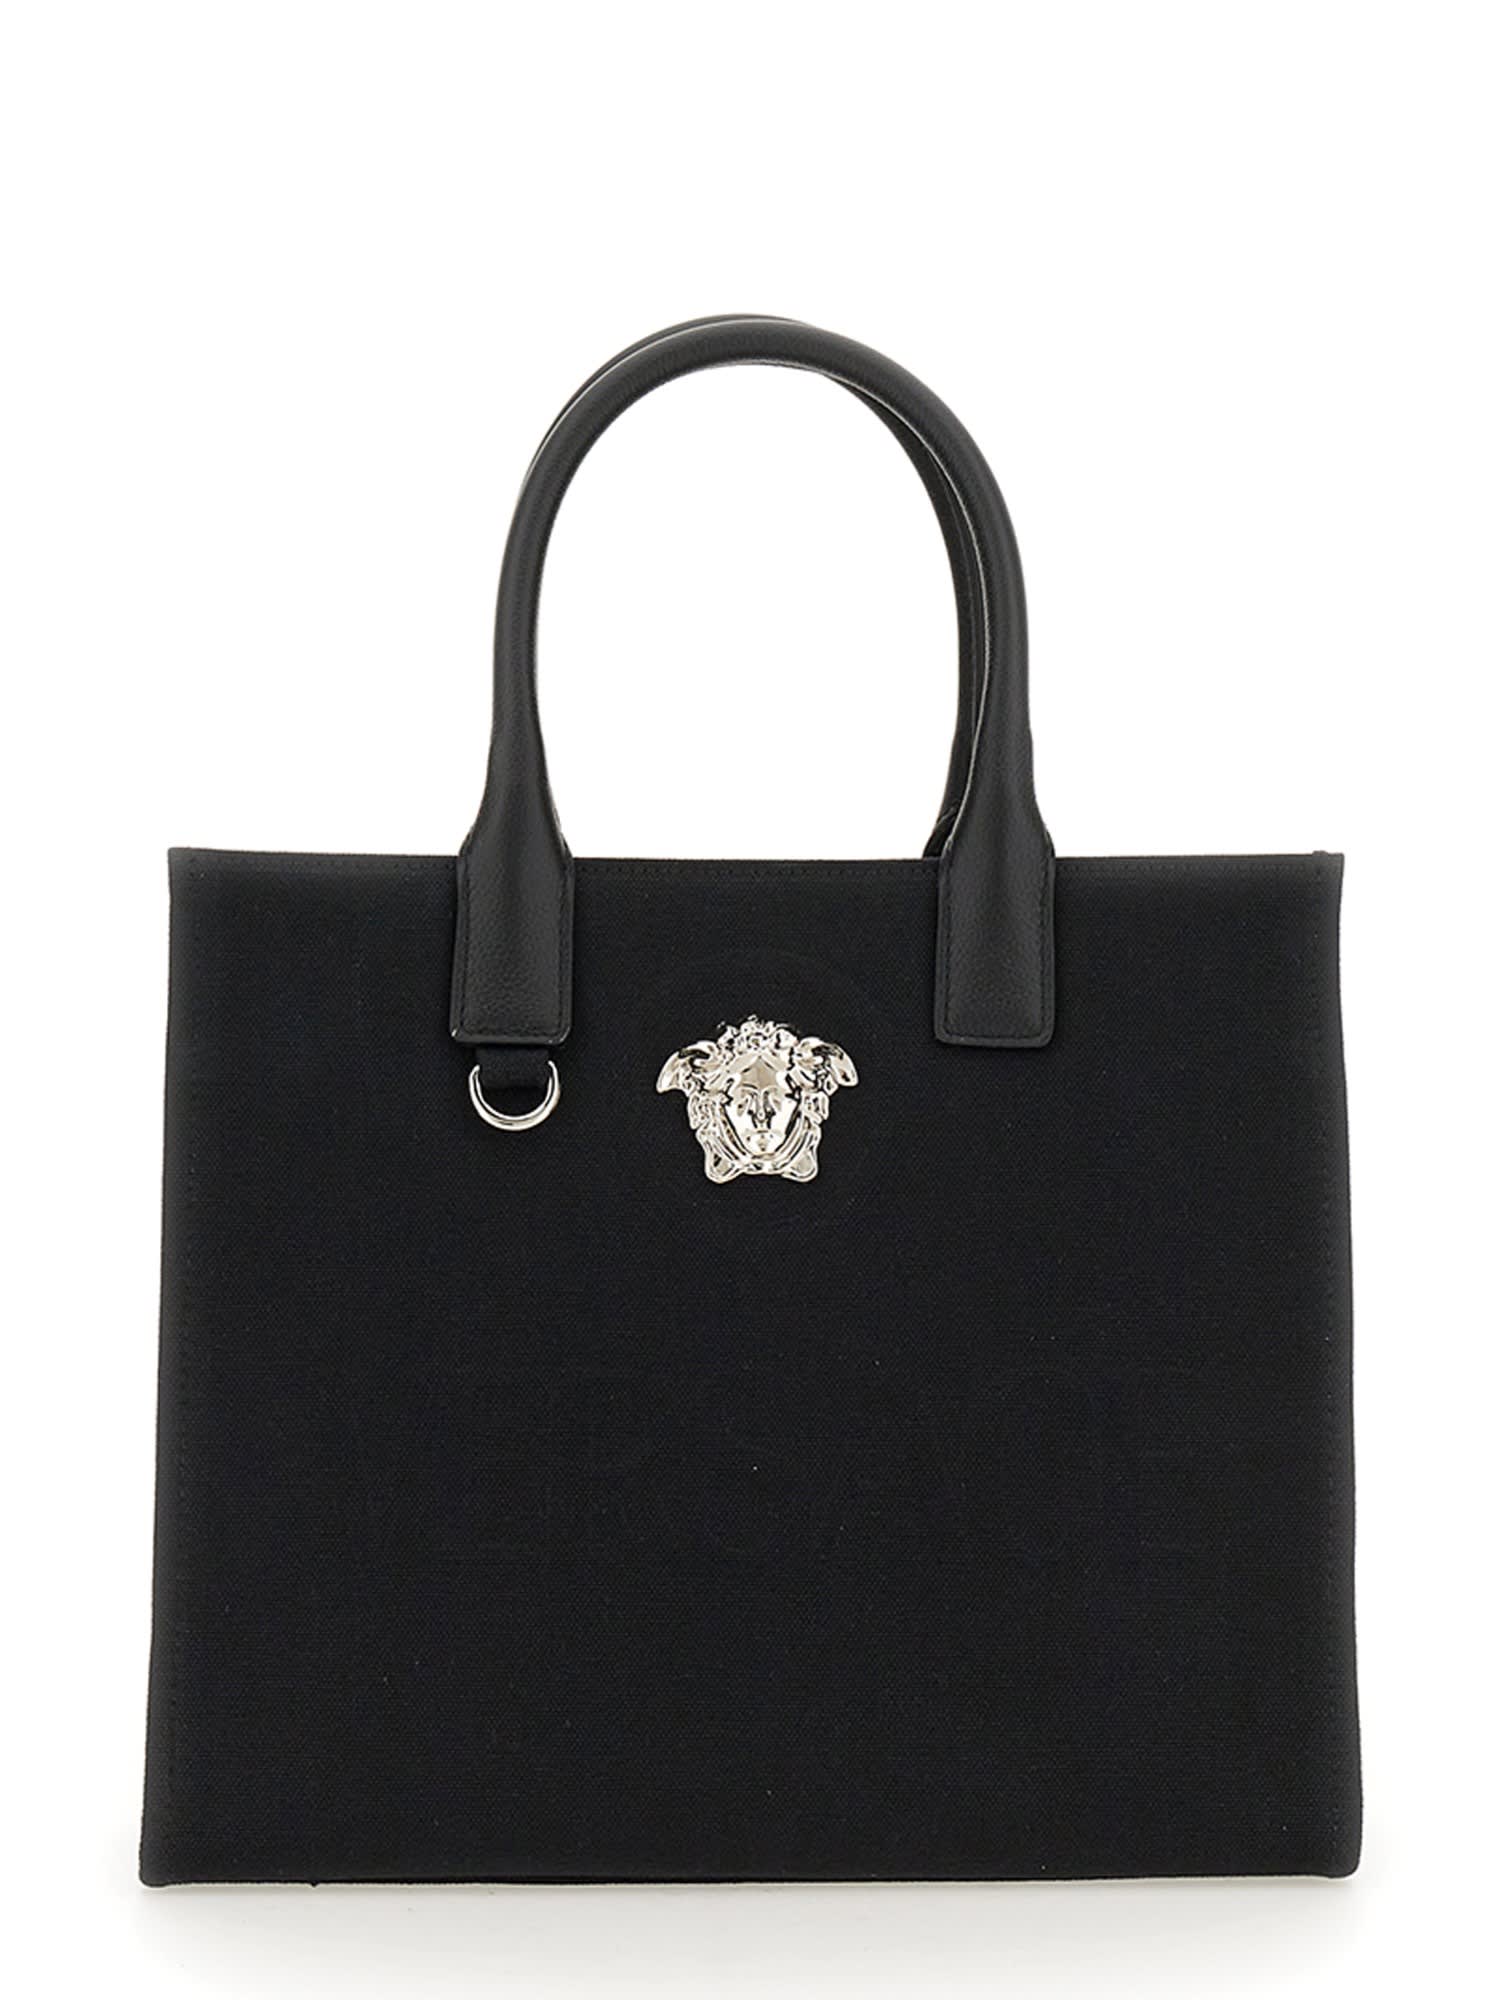 VERSACE SMALL SHOPPER BAG THE JELLYFISH